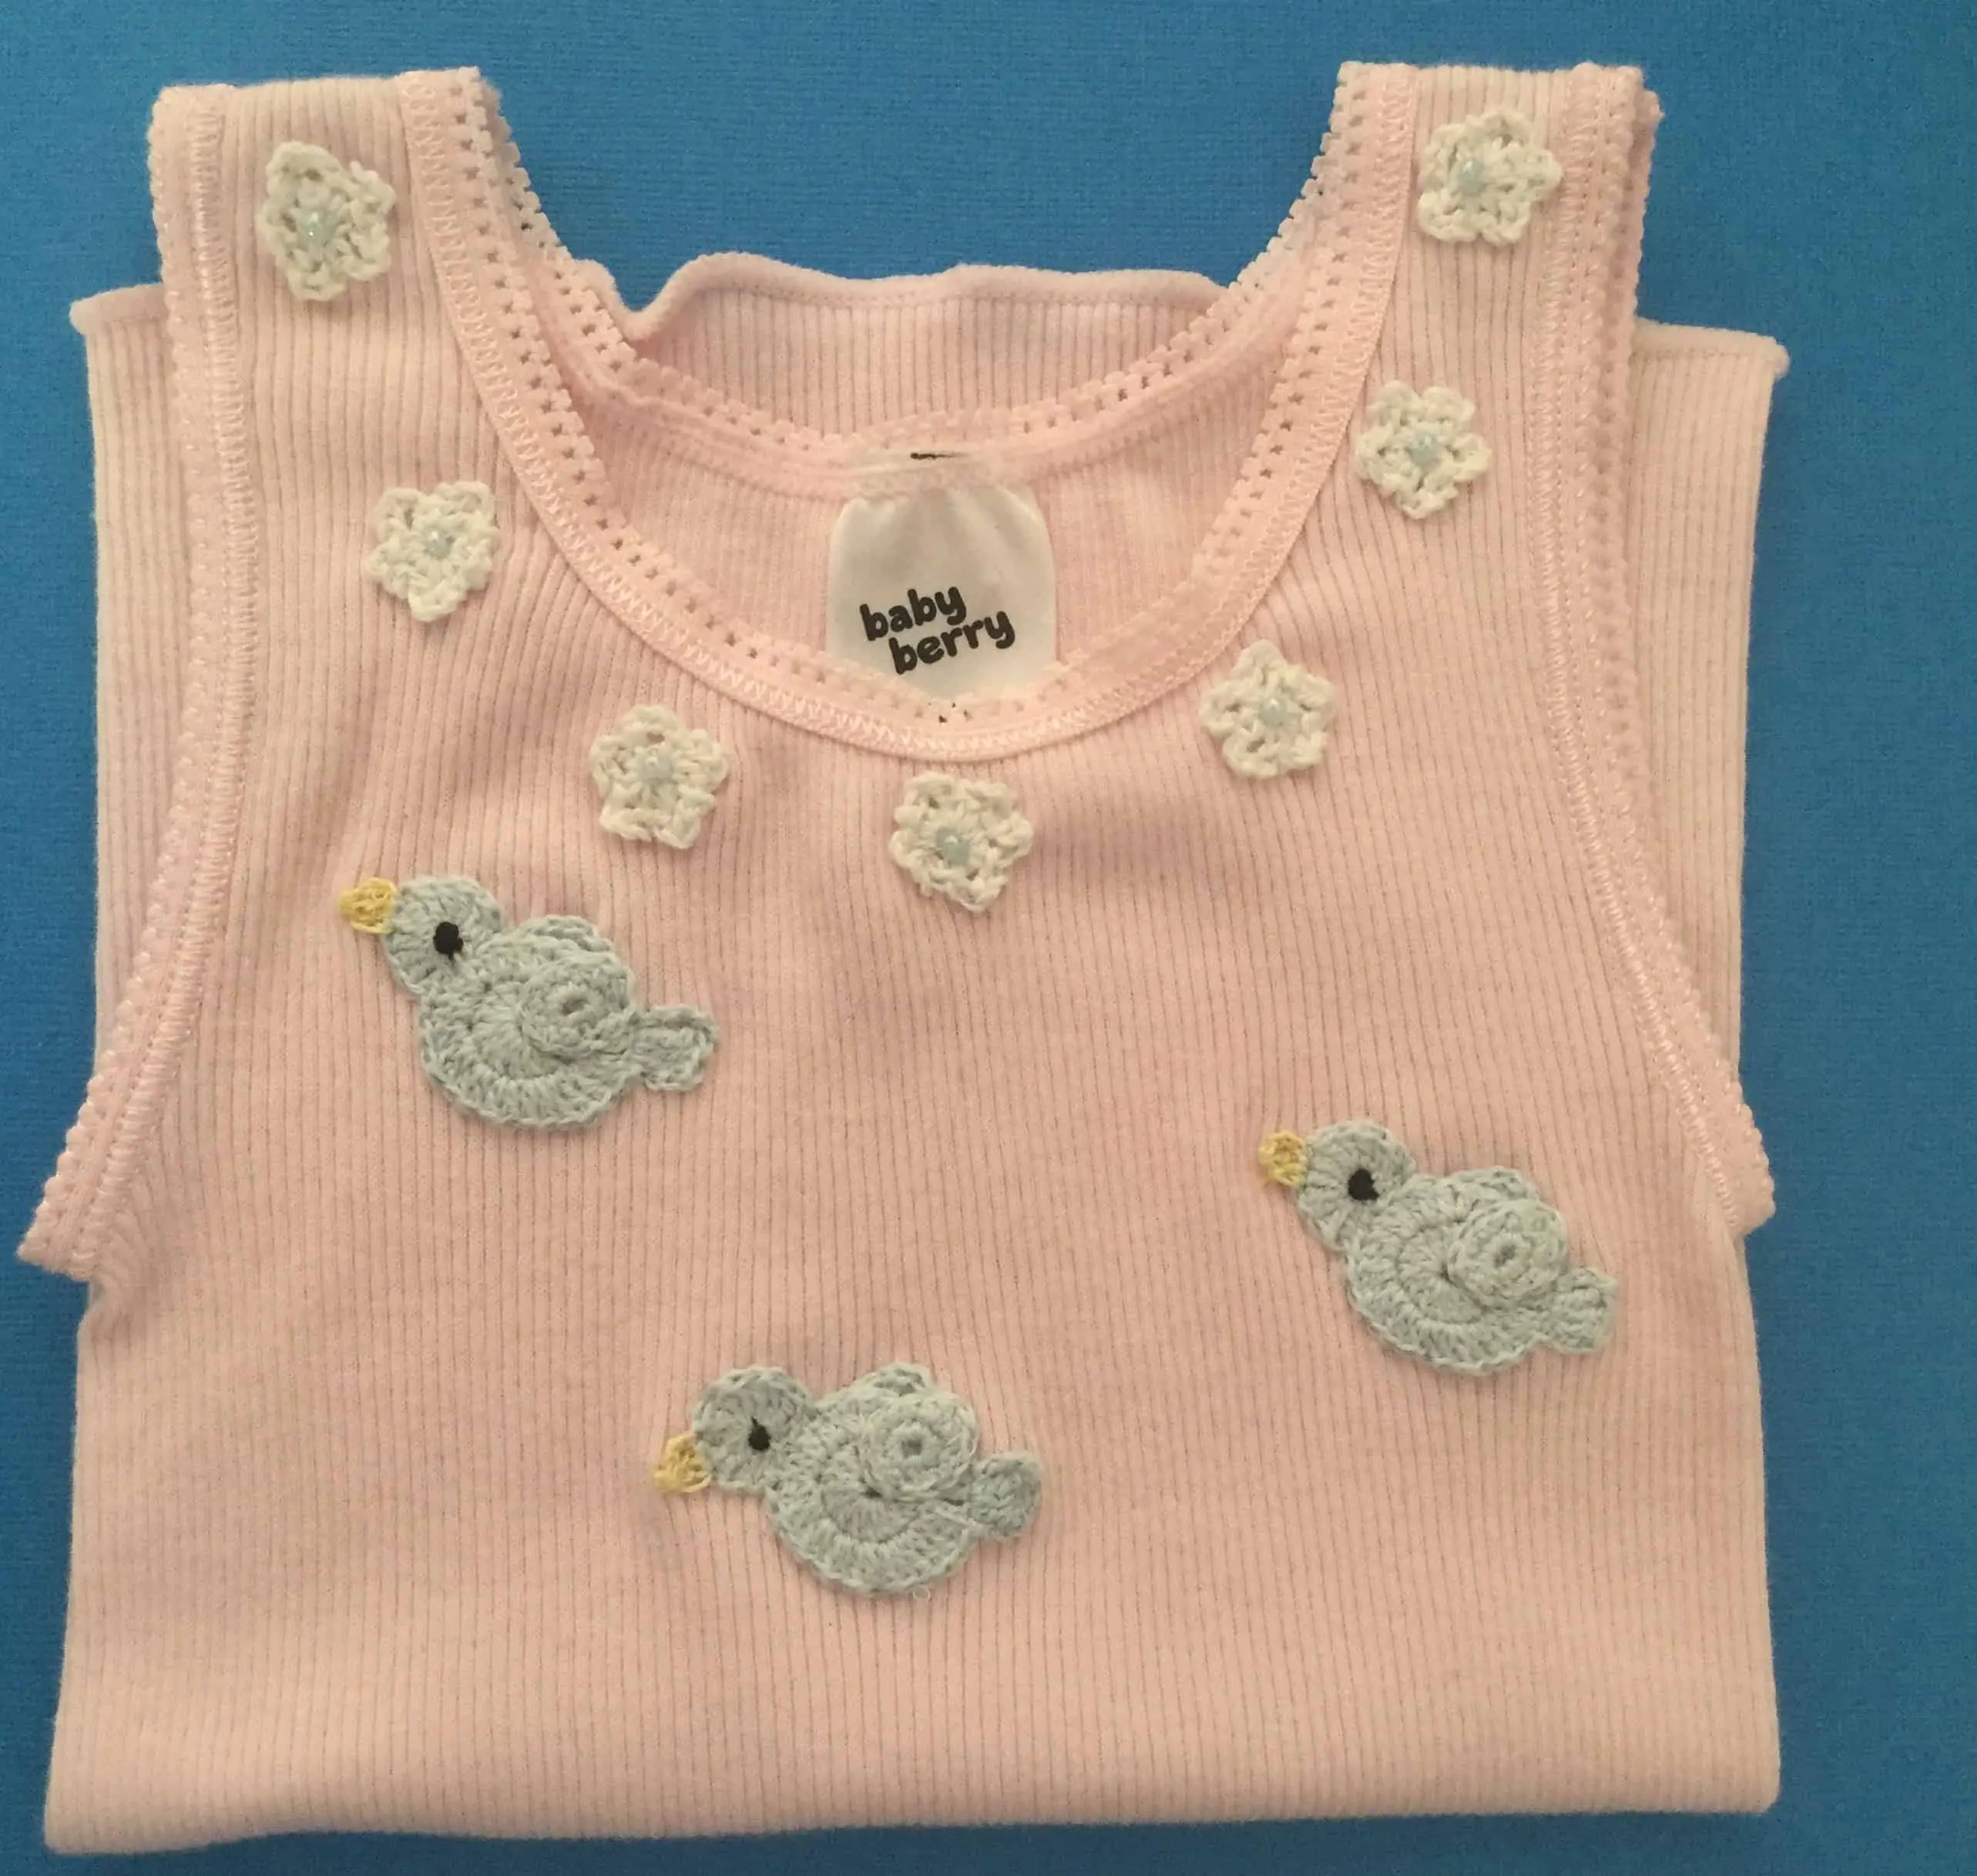 Crochet baby singlet with flowers and birds, landscape